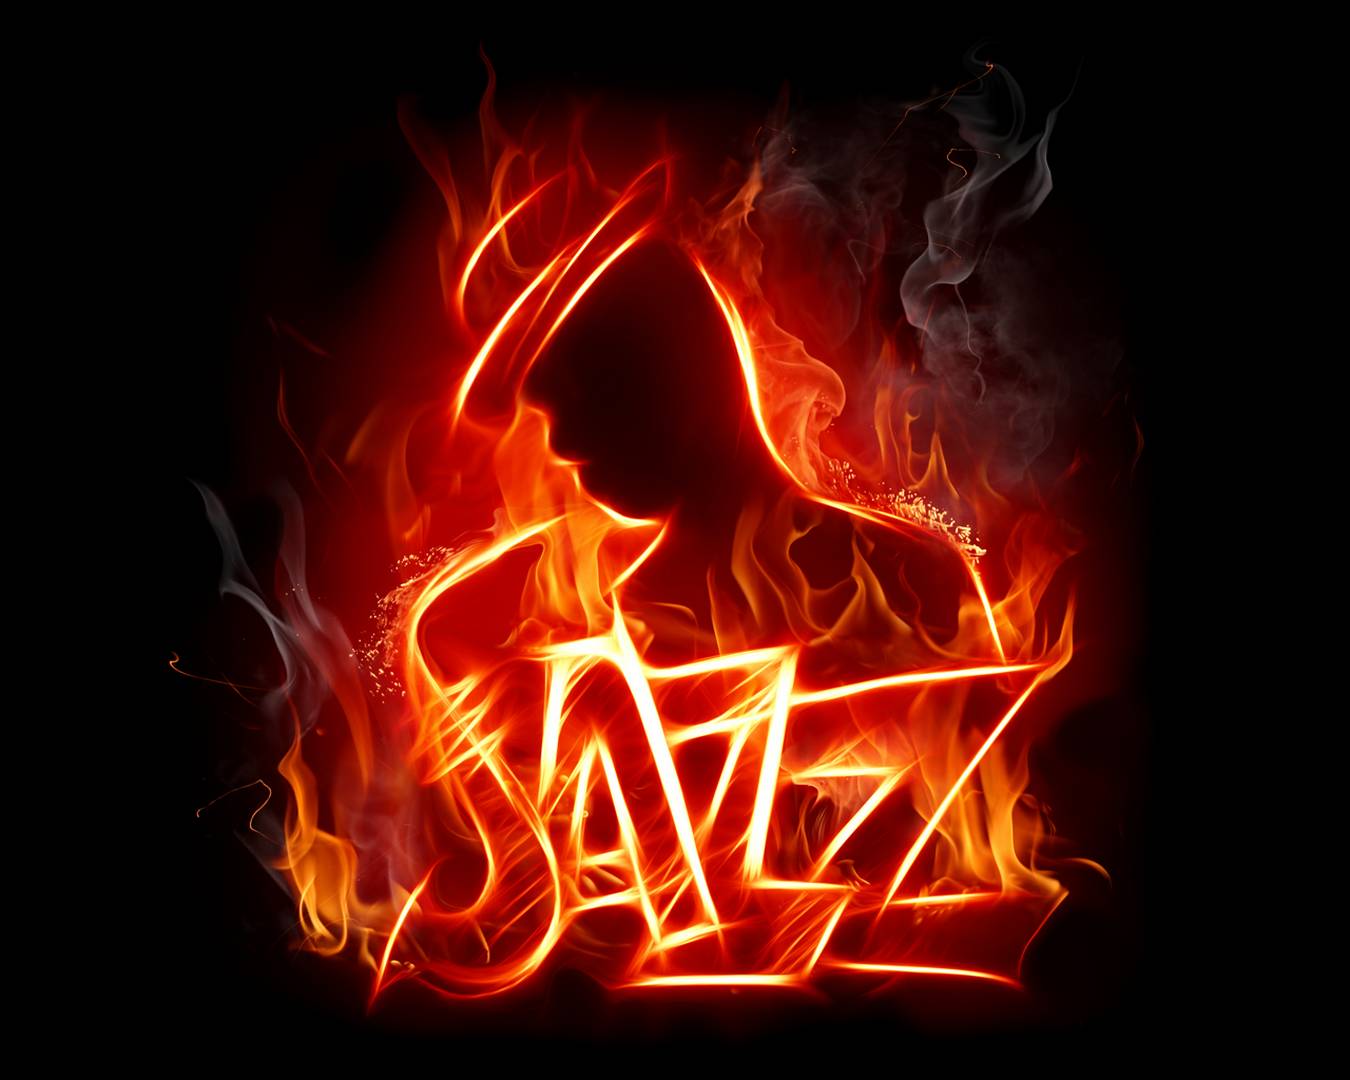 Free Download Background Jazz Music Background Kindle Pics 1350x1080 For Your Desktop Mobile Tablet Explore 74 Jazz Wallpaper Utah Jazz Wallpaper Jazz Music Wallpaper Jazz Wallpaper Desktop